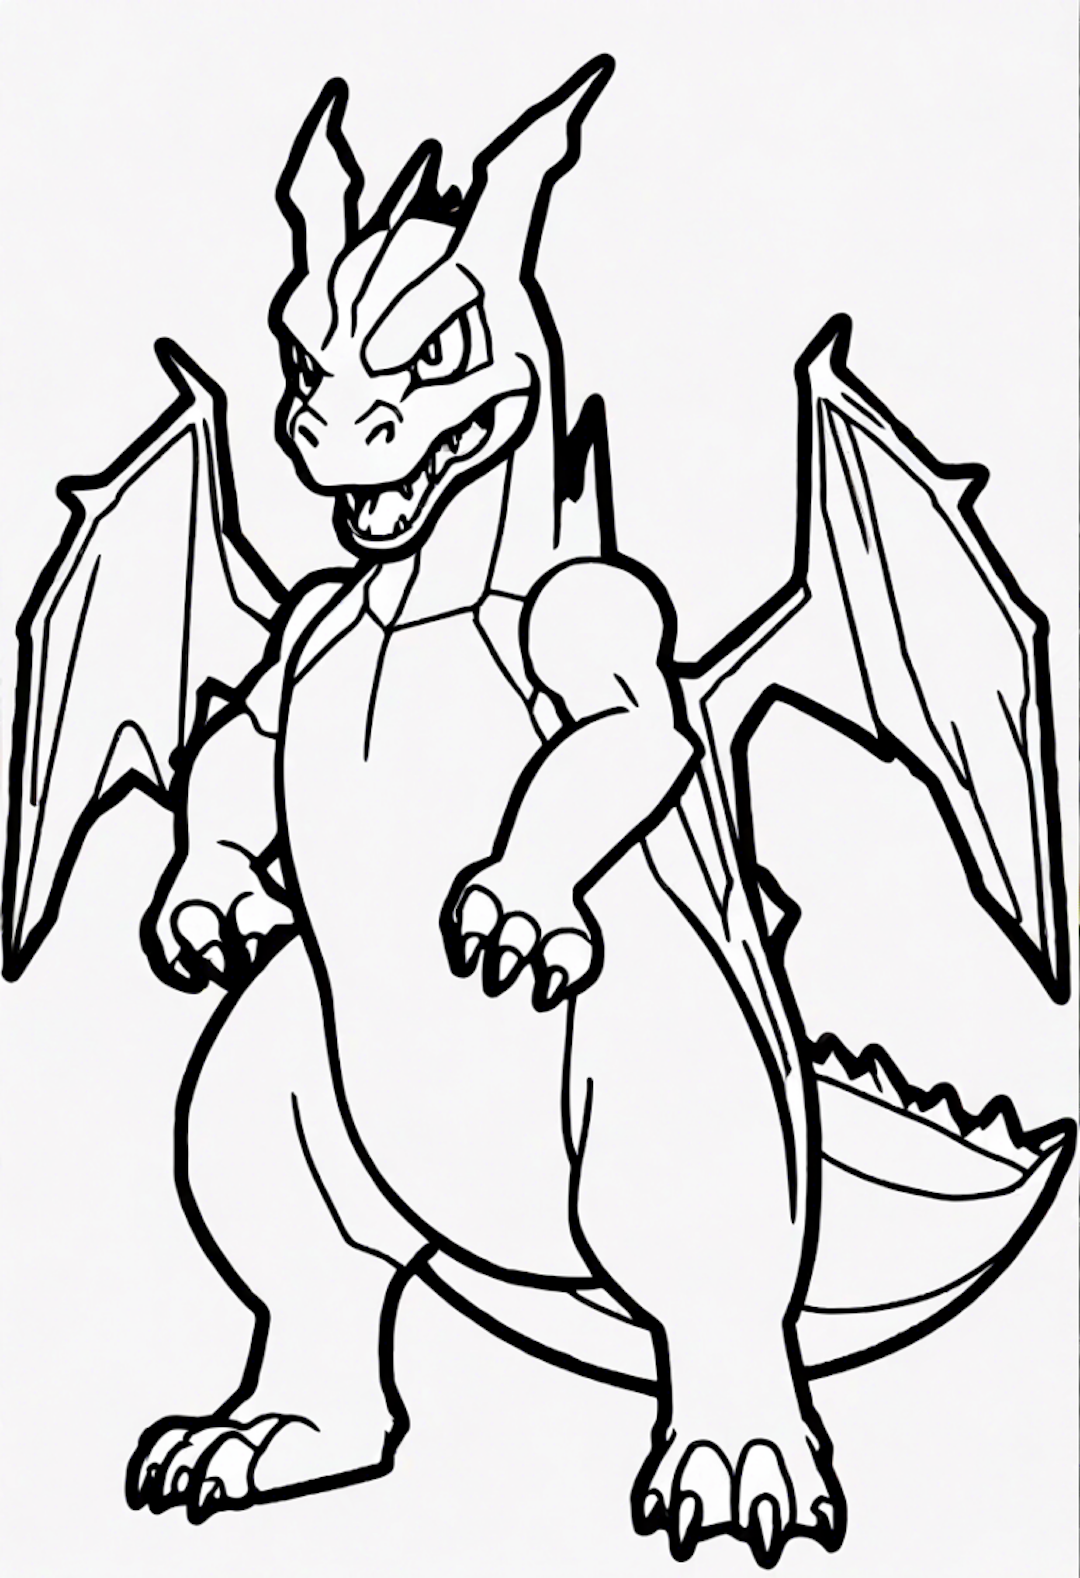 Charizard Coloring Adventure coloring pages